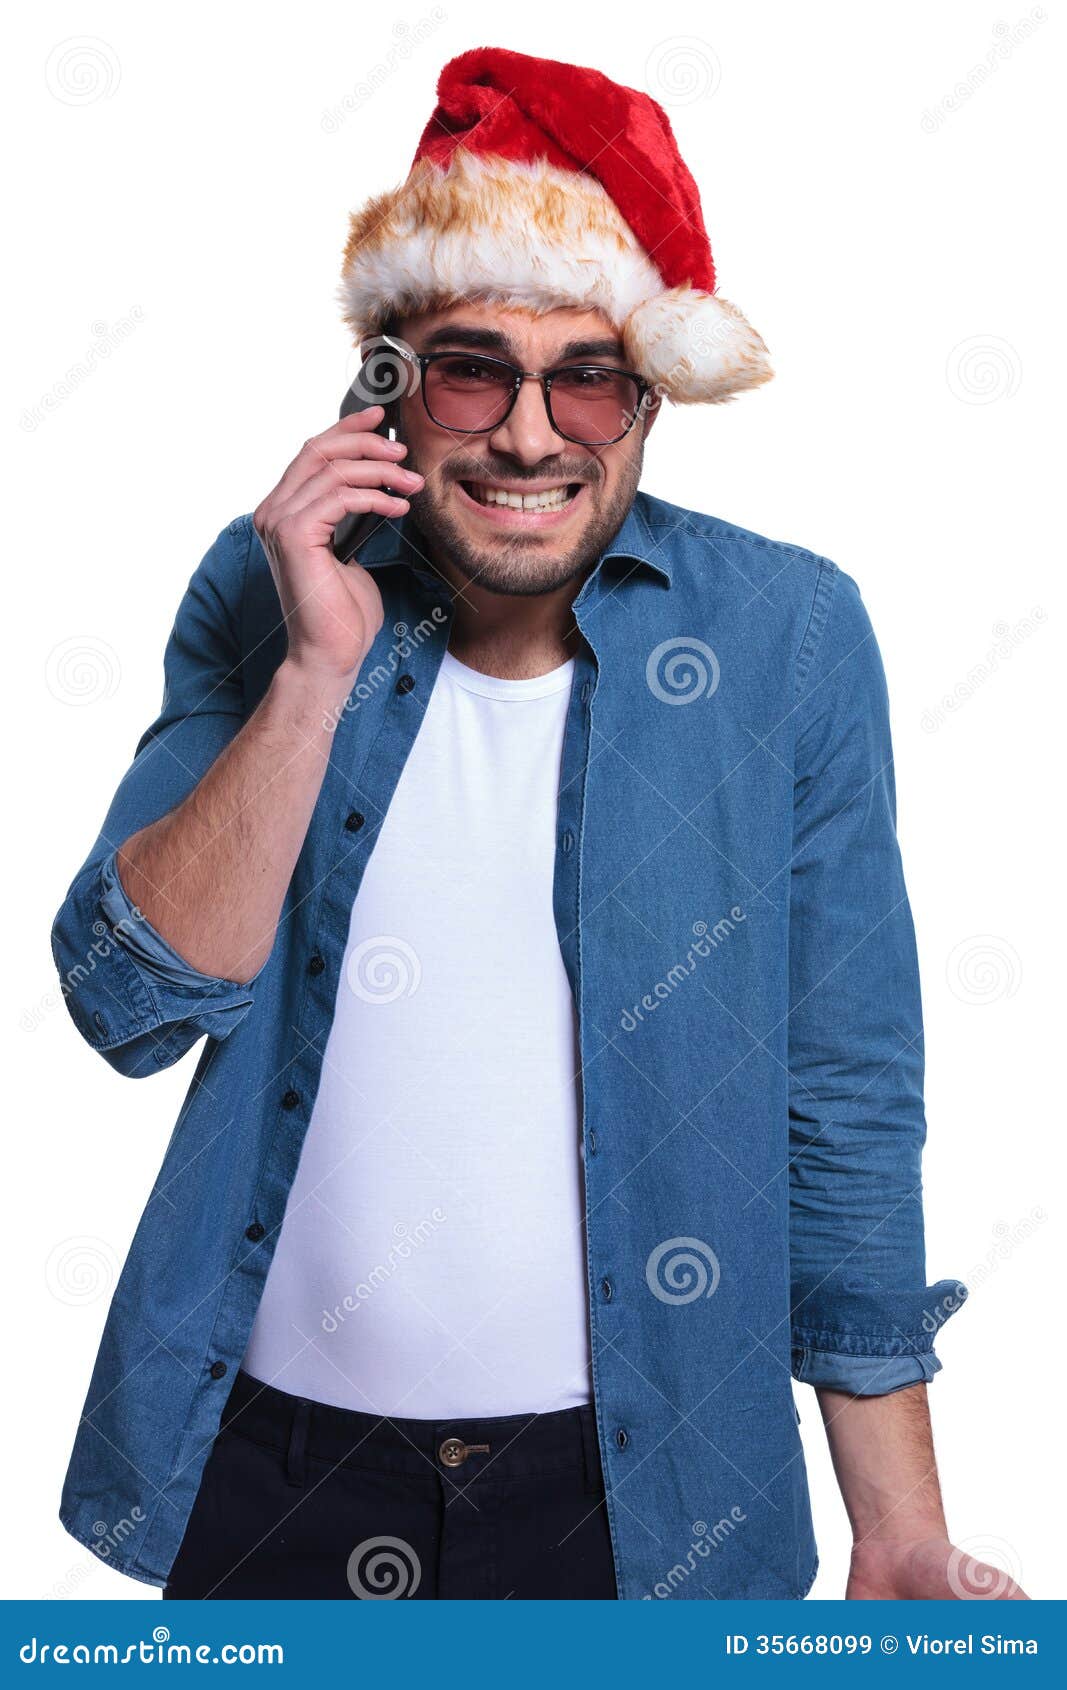 Santa Man is Receiving Bad News on His Phone Stock Image - Image of ...